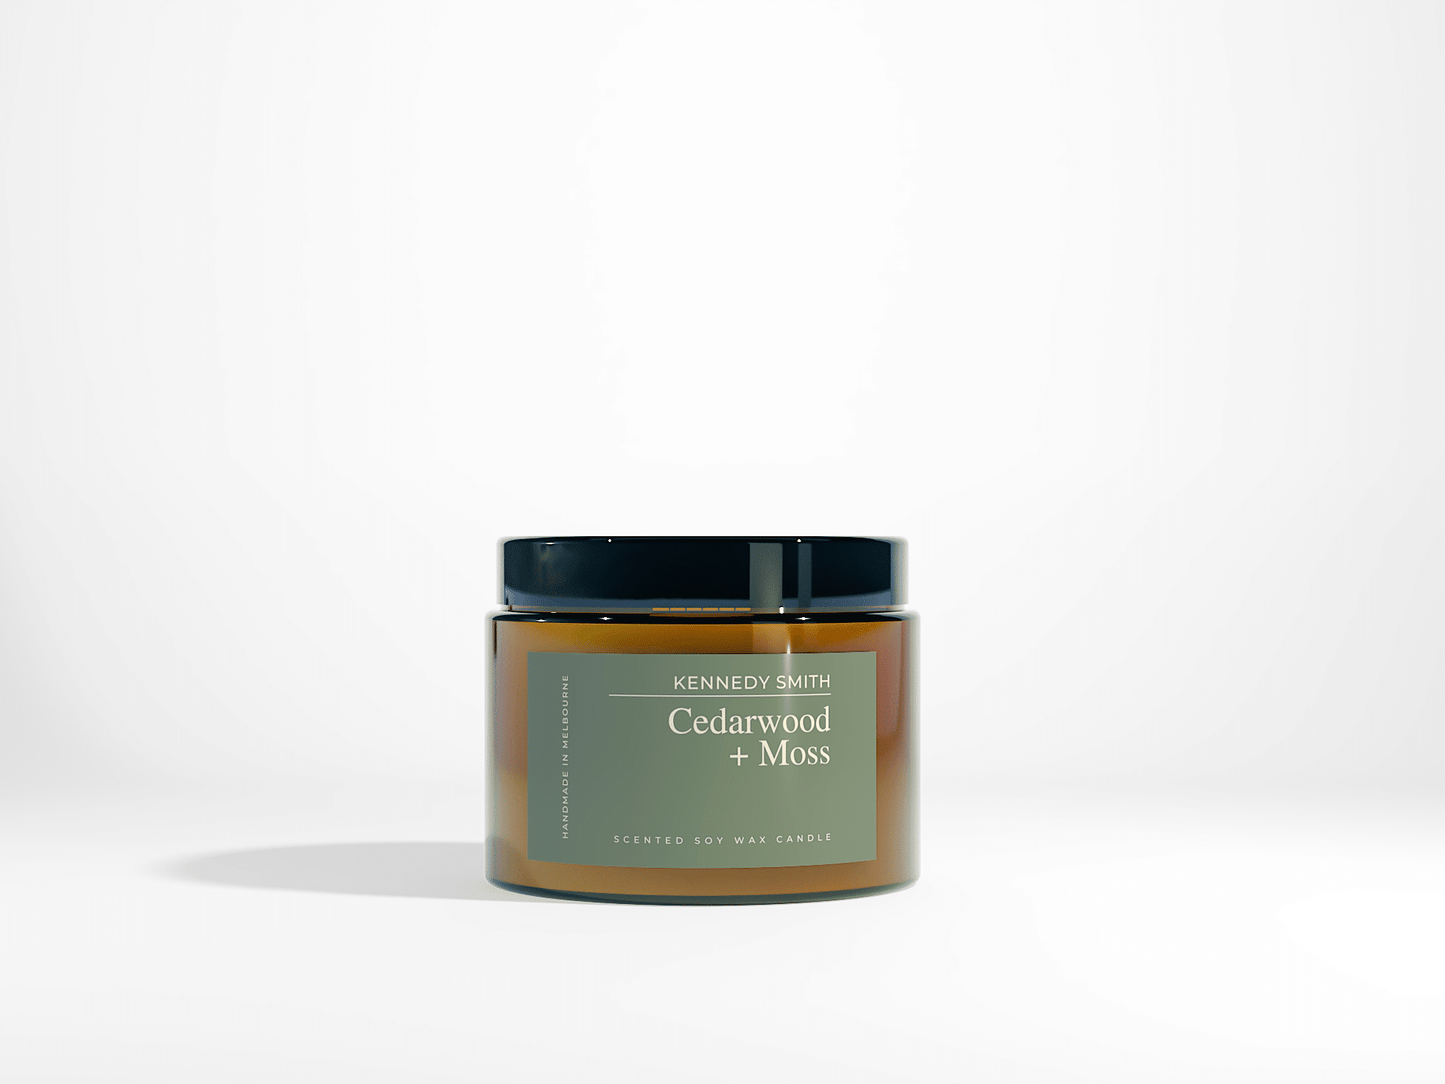 Kennedy Smith candles